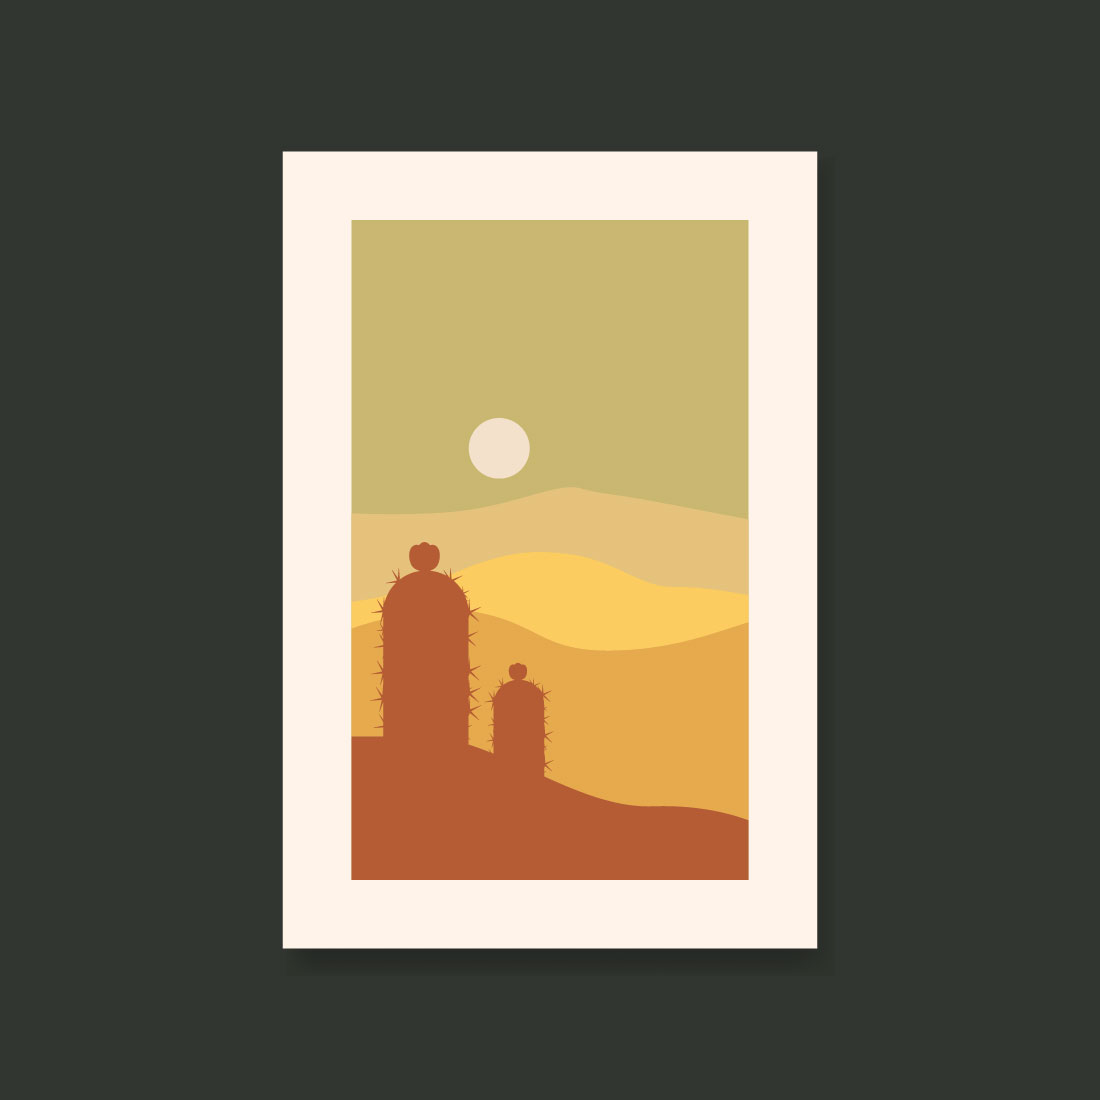 Contempory landscape poster with cactus vector illustration only $5 preview image.